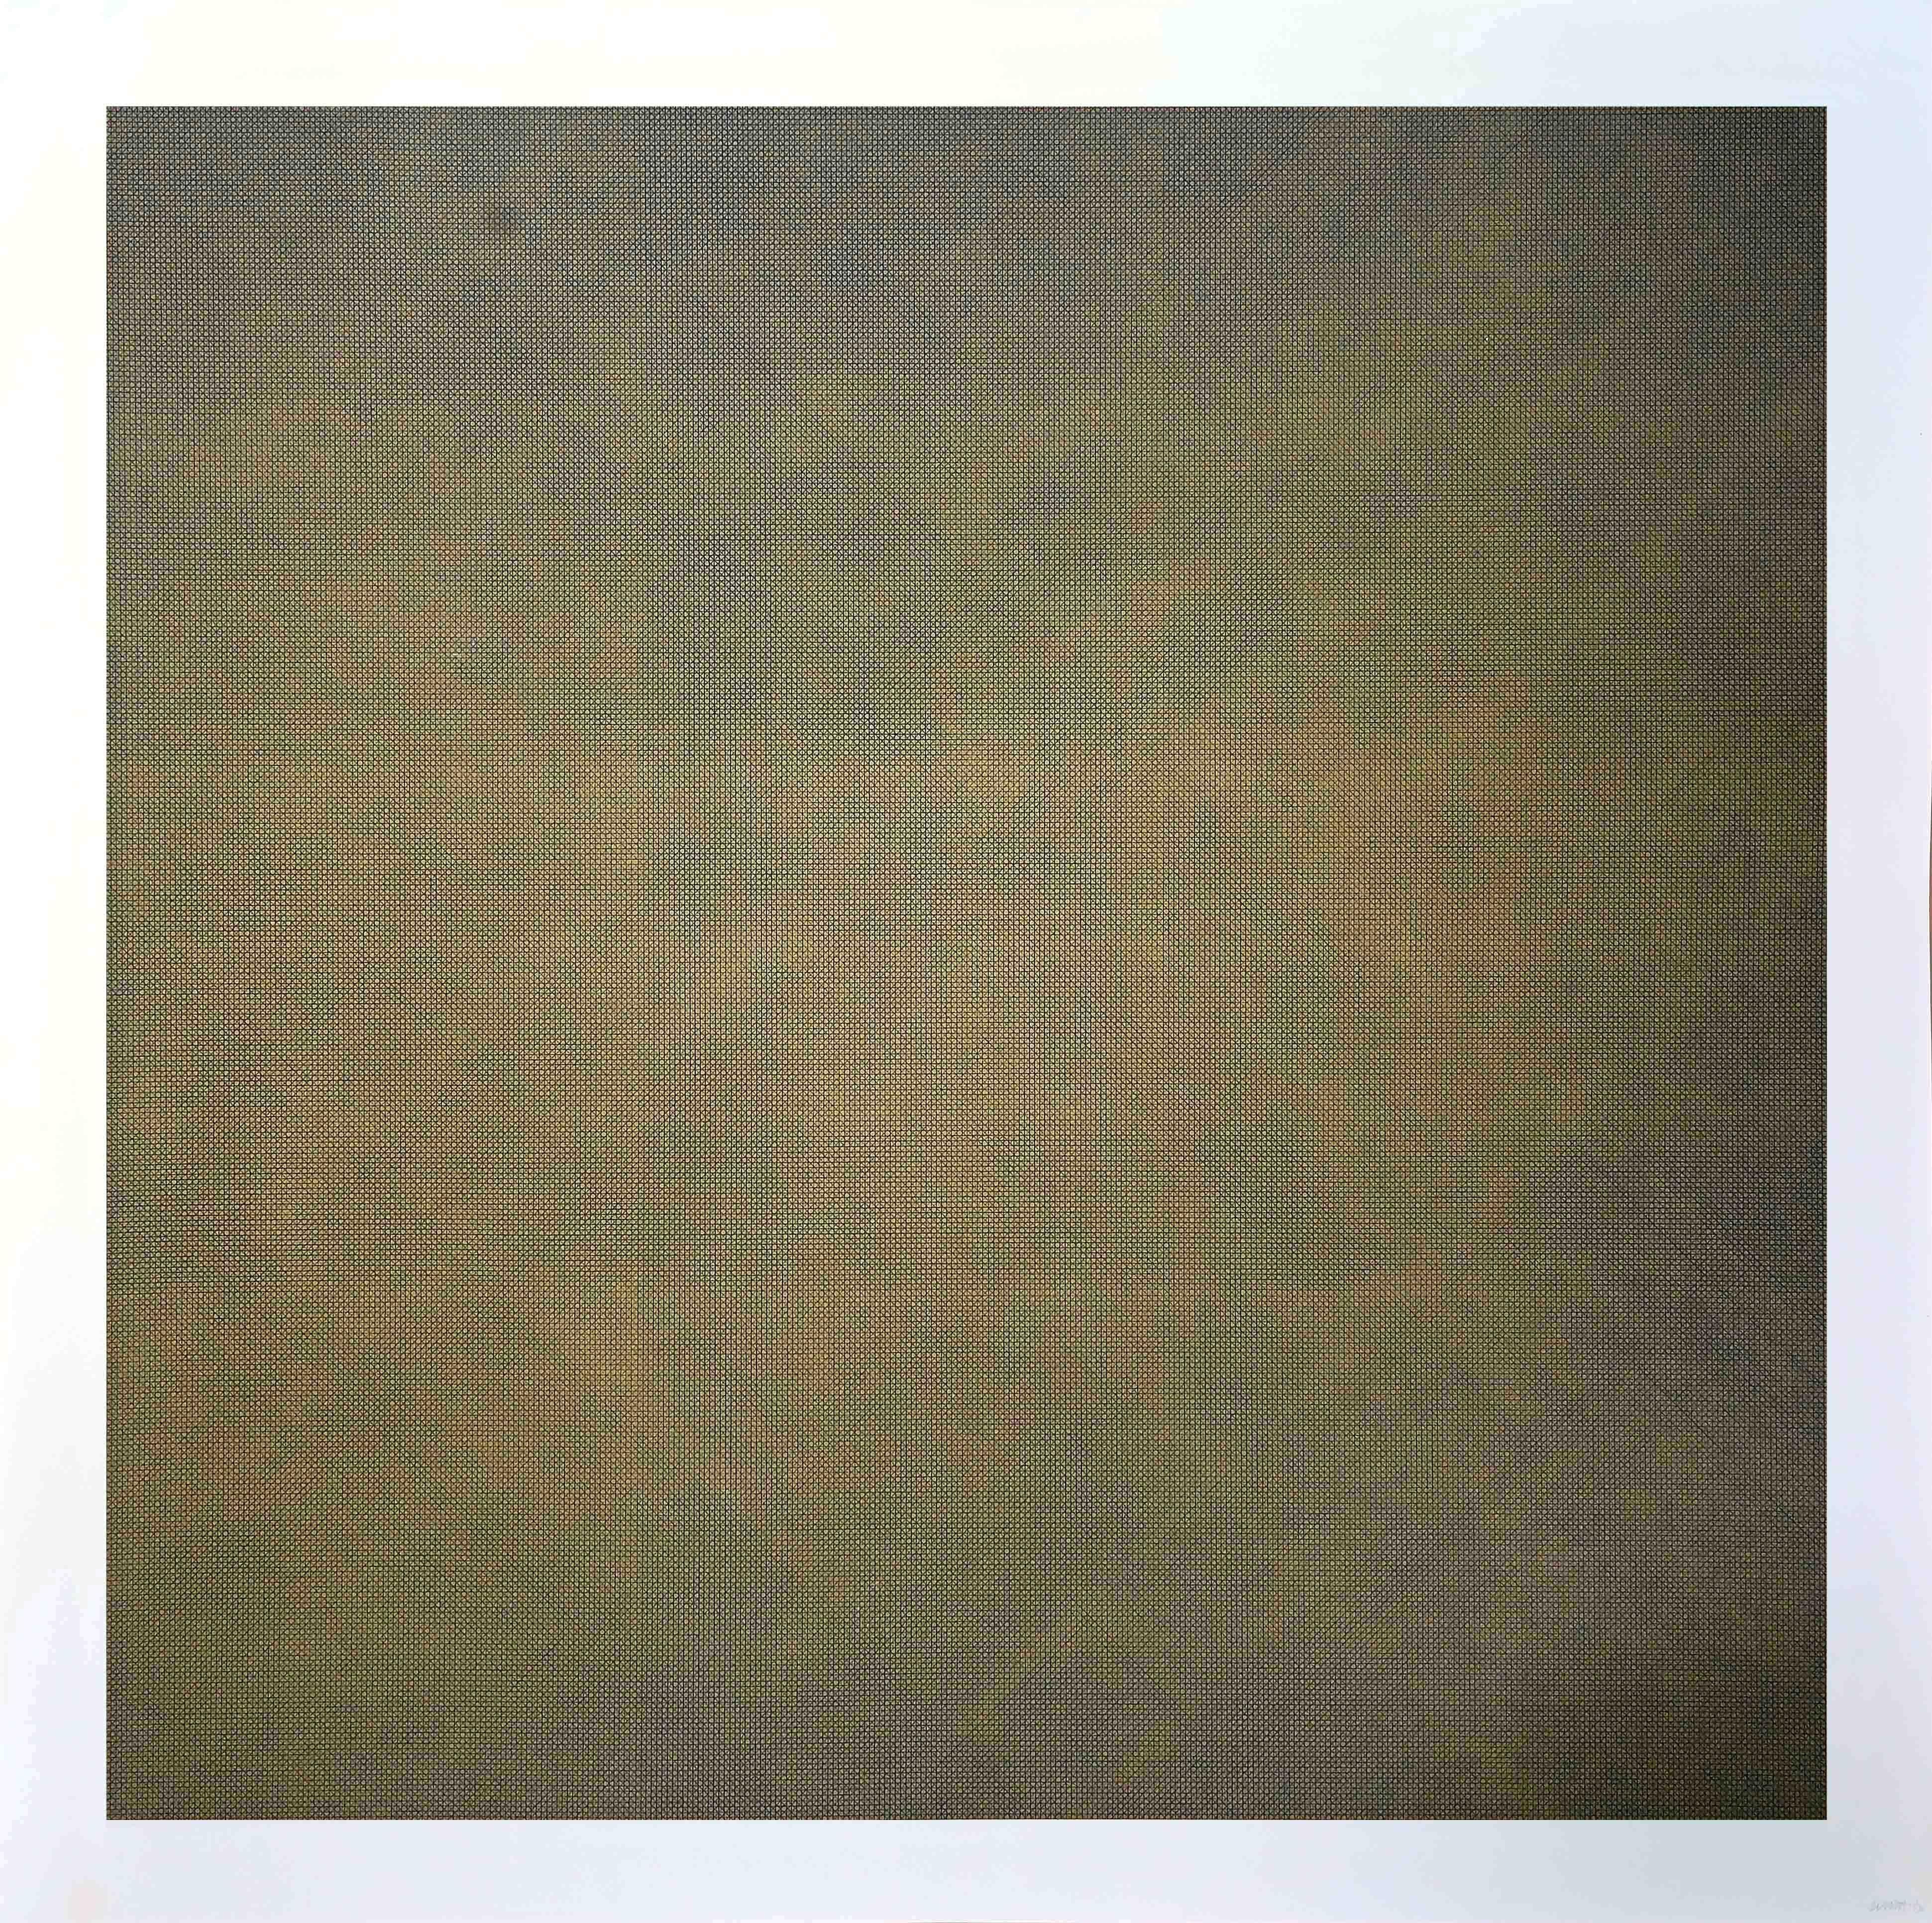 Sol LeWitt Abstract Print - Colors with Lines in Four Directions - Sol Lewitt - 1991